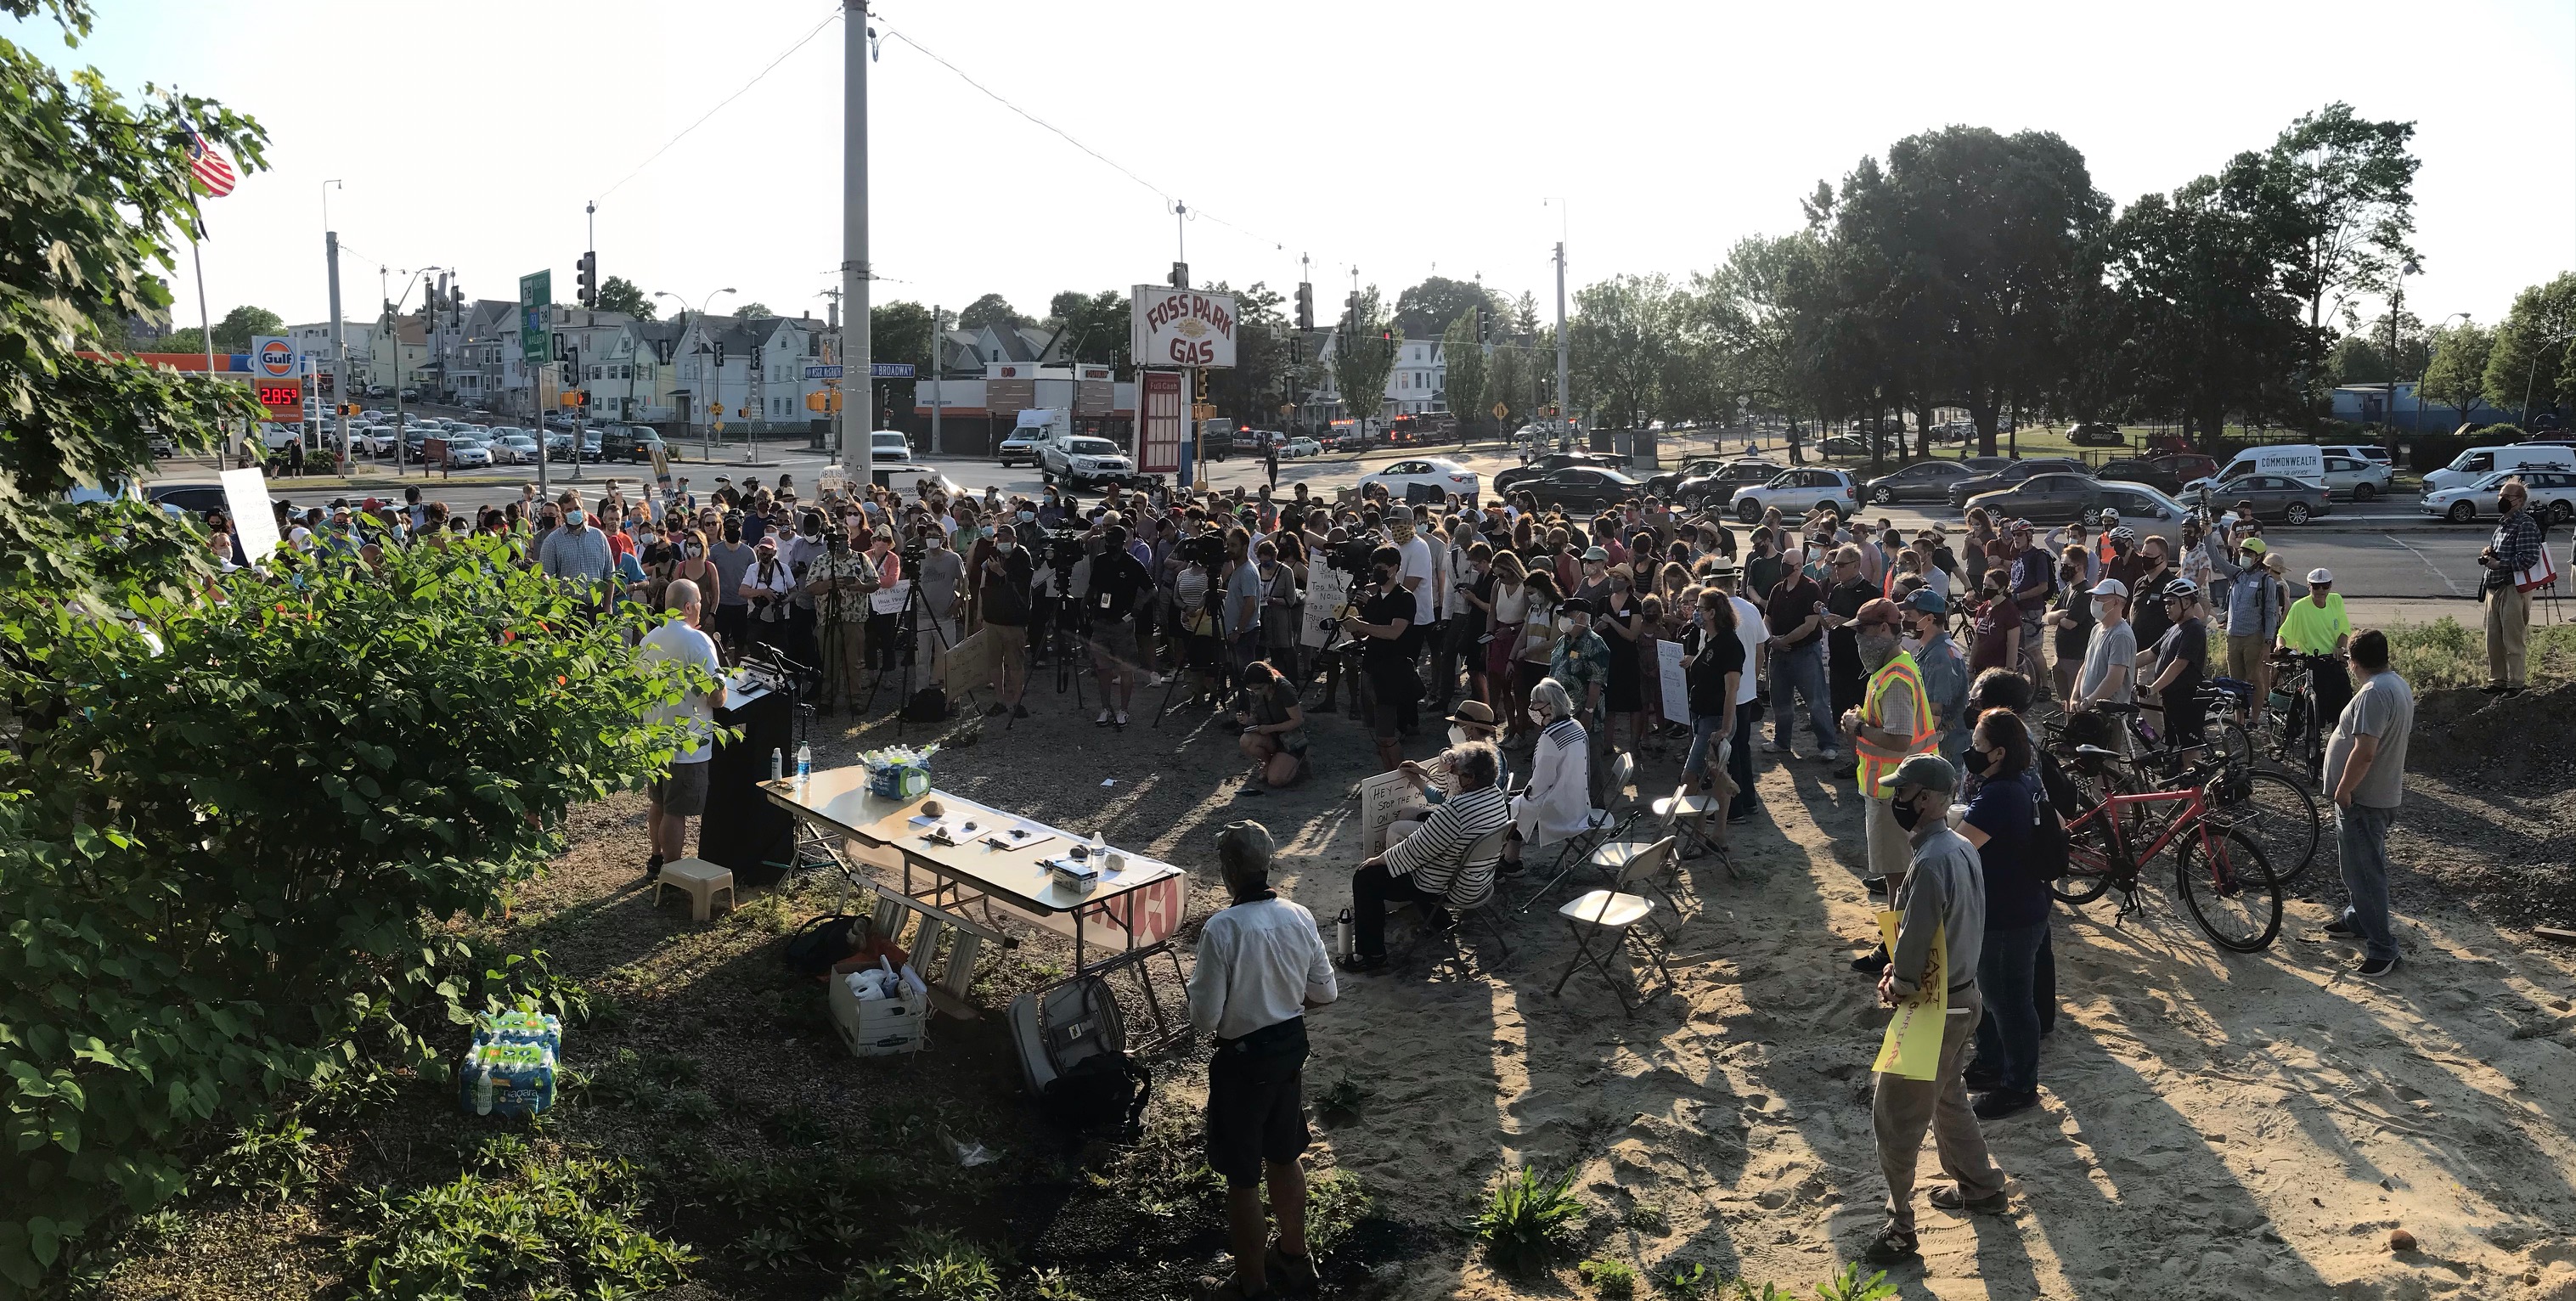 Advocates and elected officials gathered at an abandoned gas station on May 26, 2021 to memorialize victims of traffic violence in the area and demand immediate safety improvements to nearby roadways, including Mystic Ave. and the McGrath Highway.